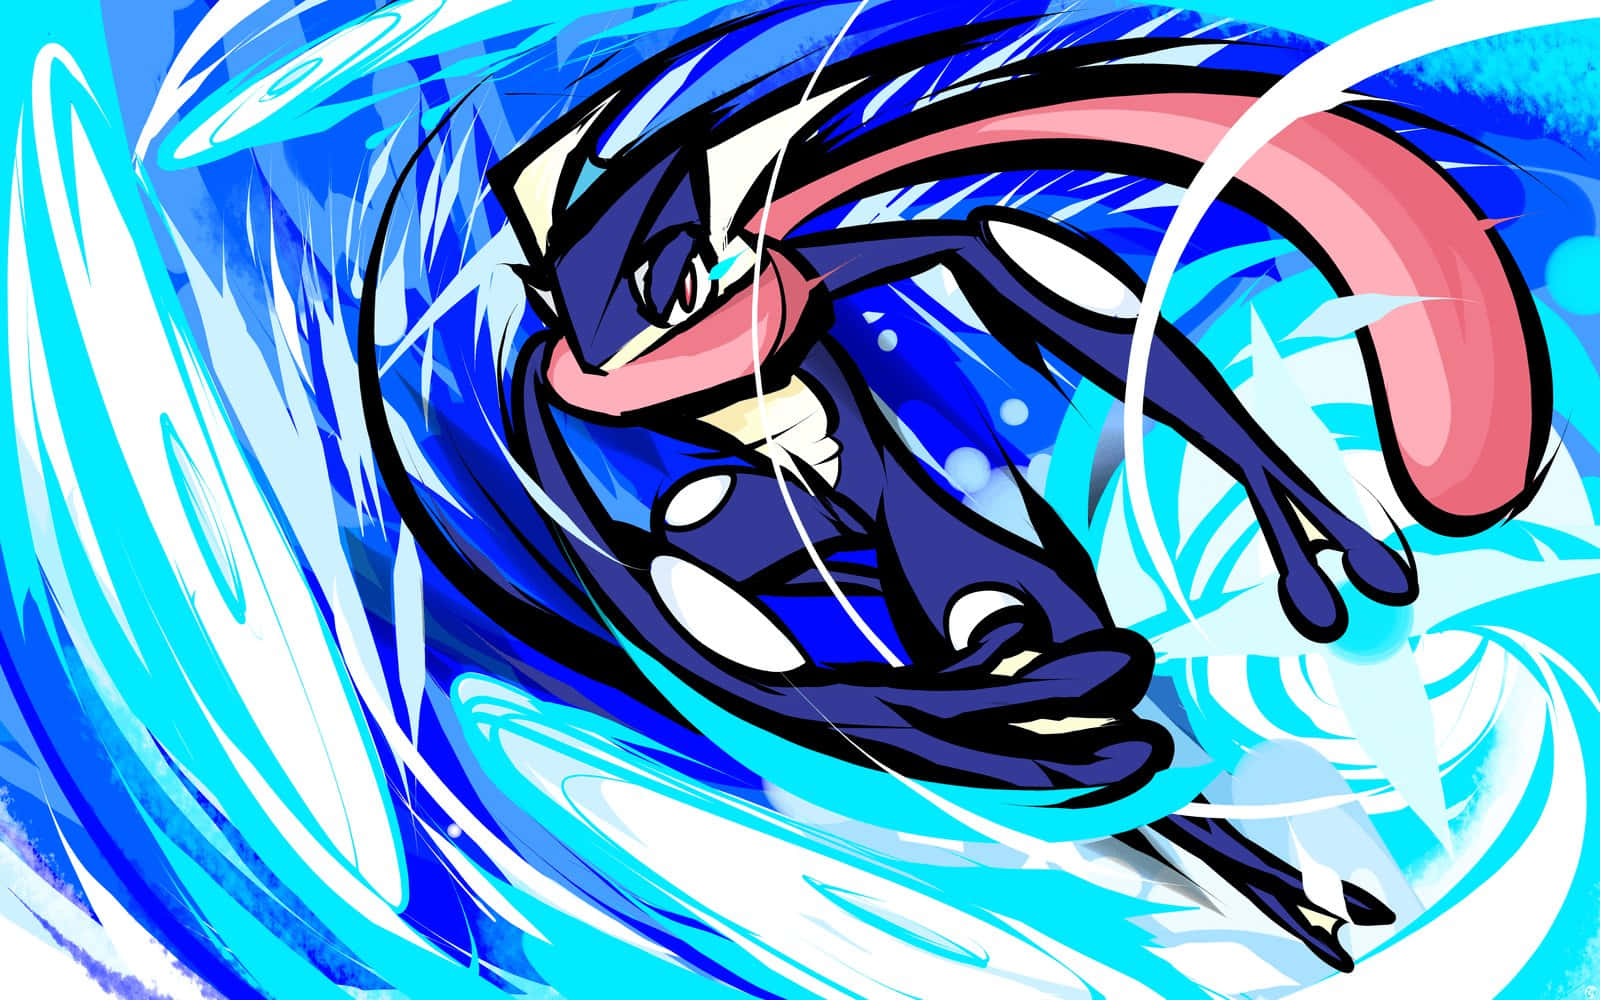 Show Your Stealthy Side with a Greninja